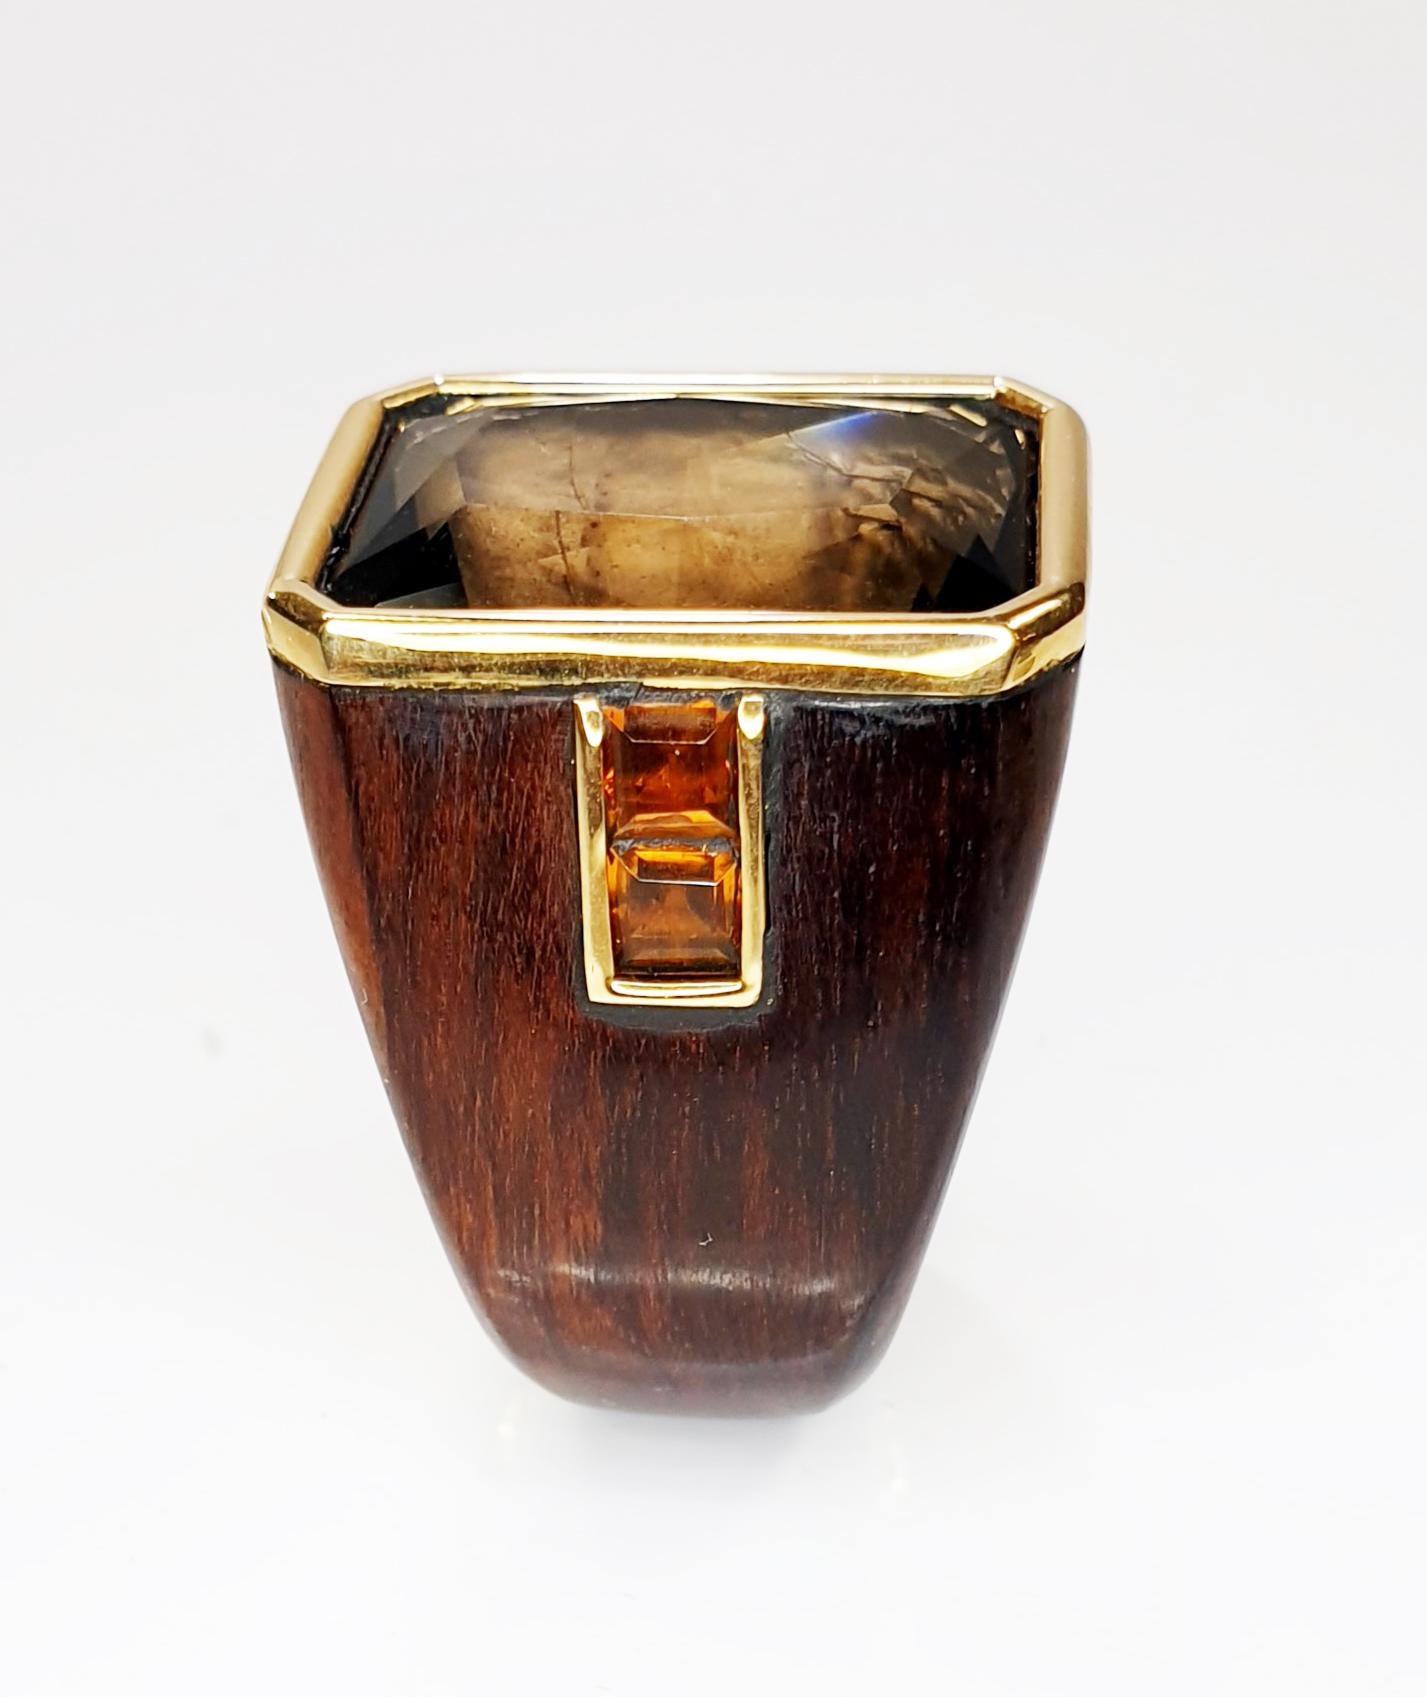 Contemporary Emerald Cut 17.5ct Smoked Quartz 18k Gold in African Ebony Ring